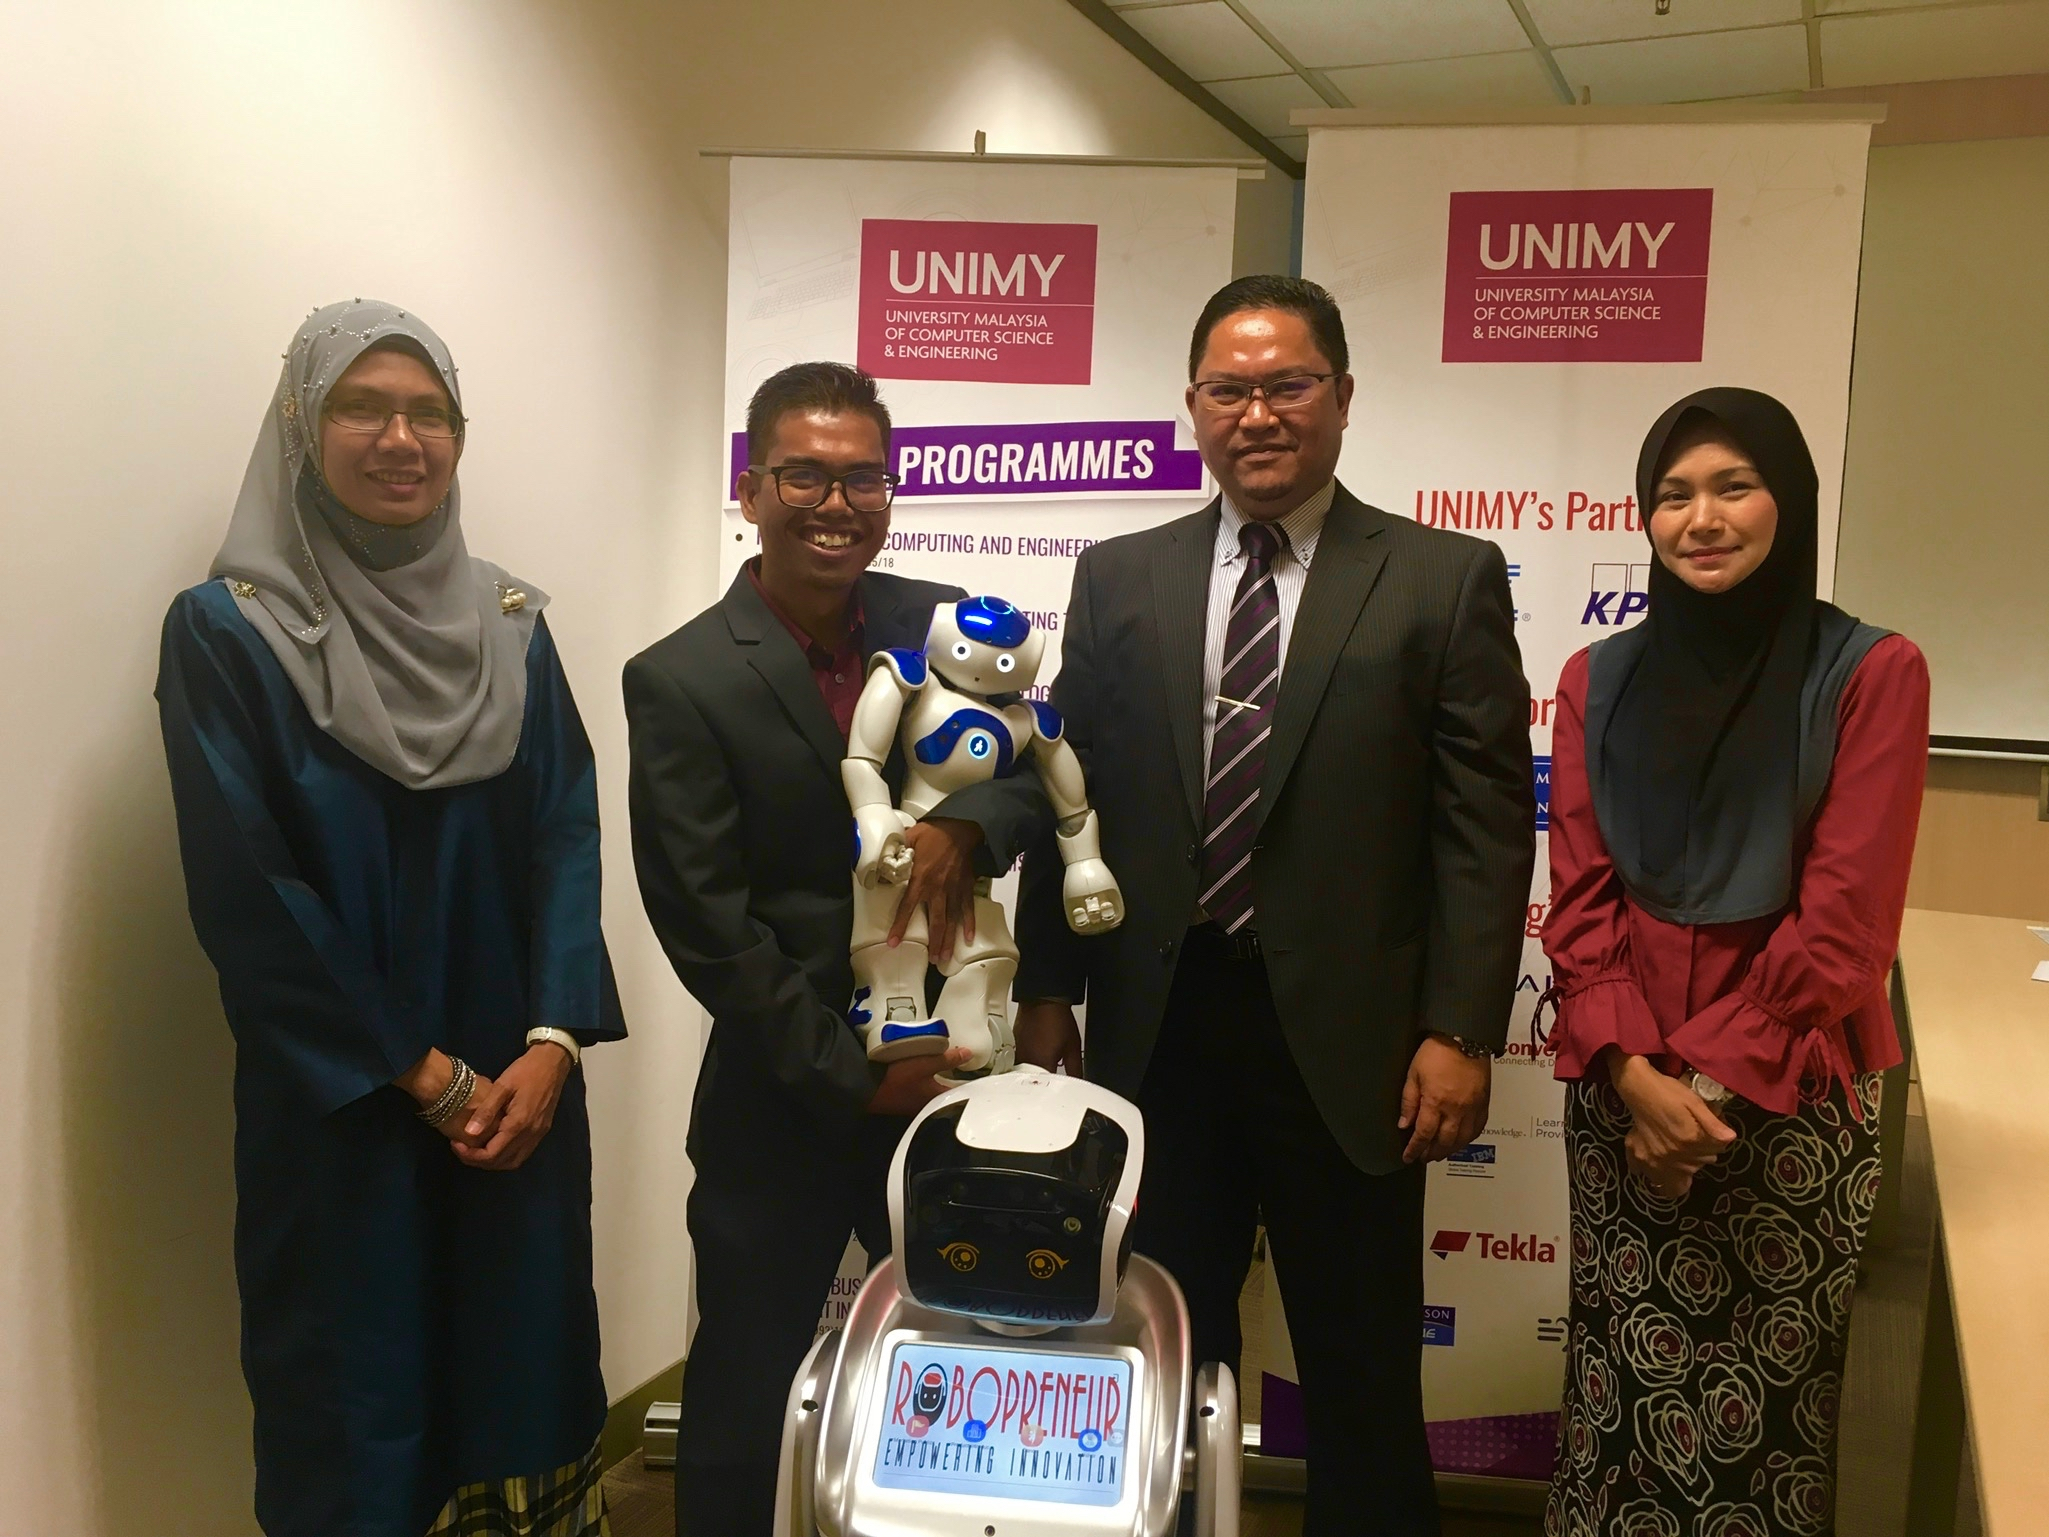 Founder Collaboration Agreement Unimy Signs A Collaboration Agreement With Robopreneur